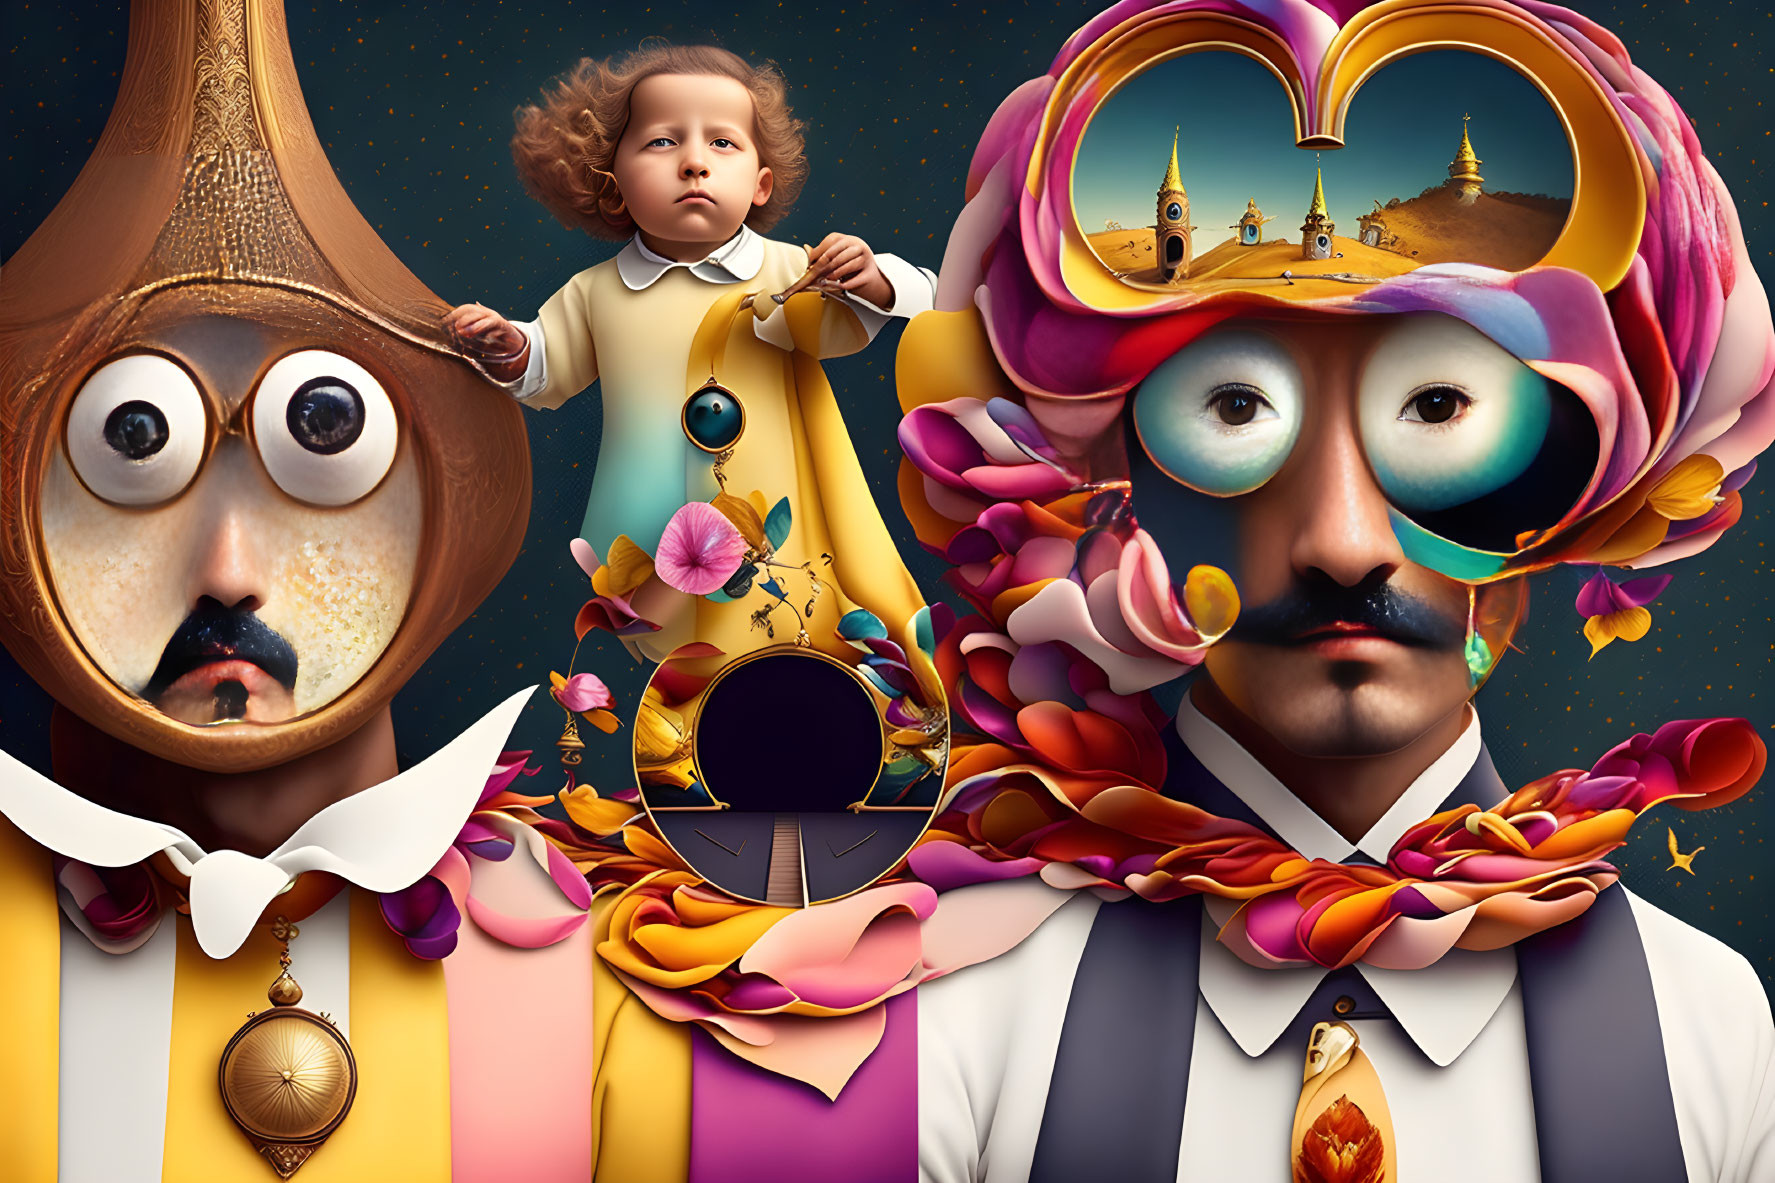 Whimsical surreal artwork: Bell-shaped face, heart-shaped cutout, child floating